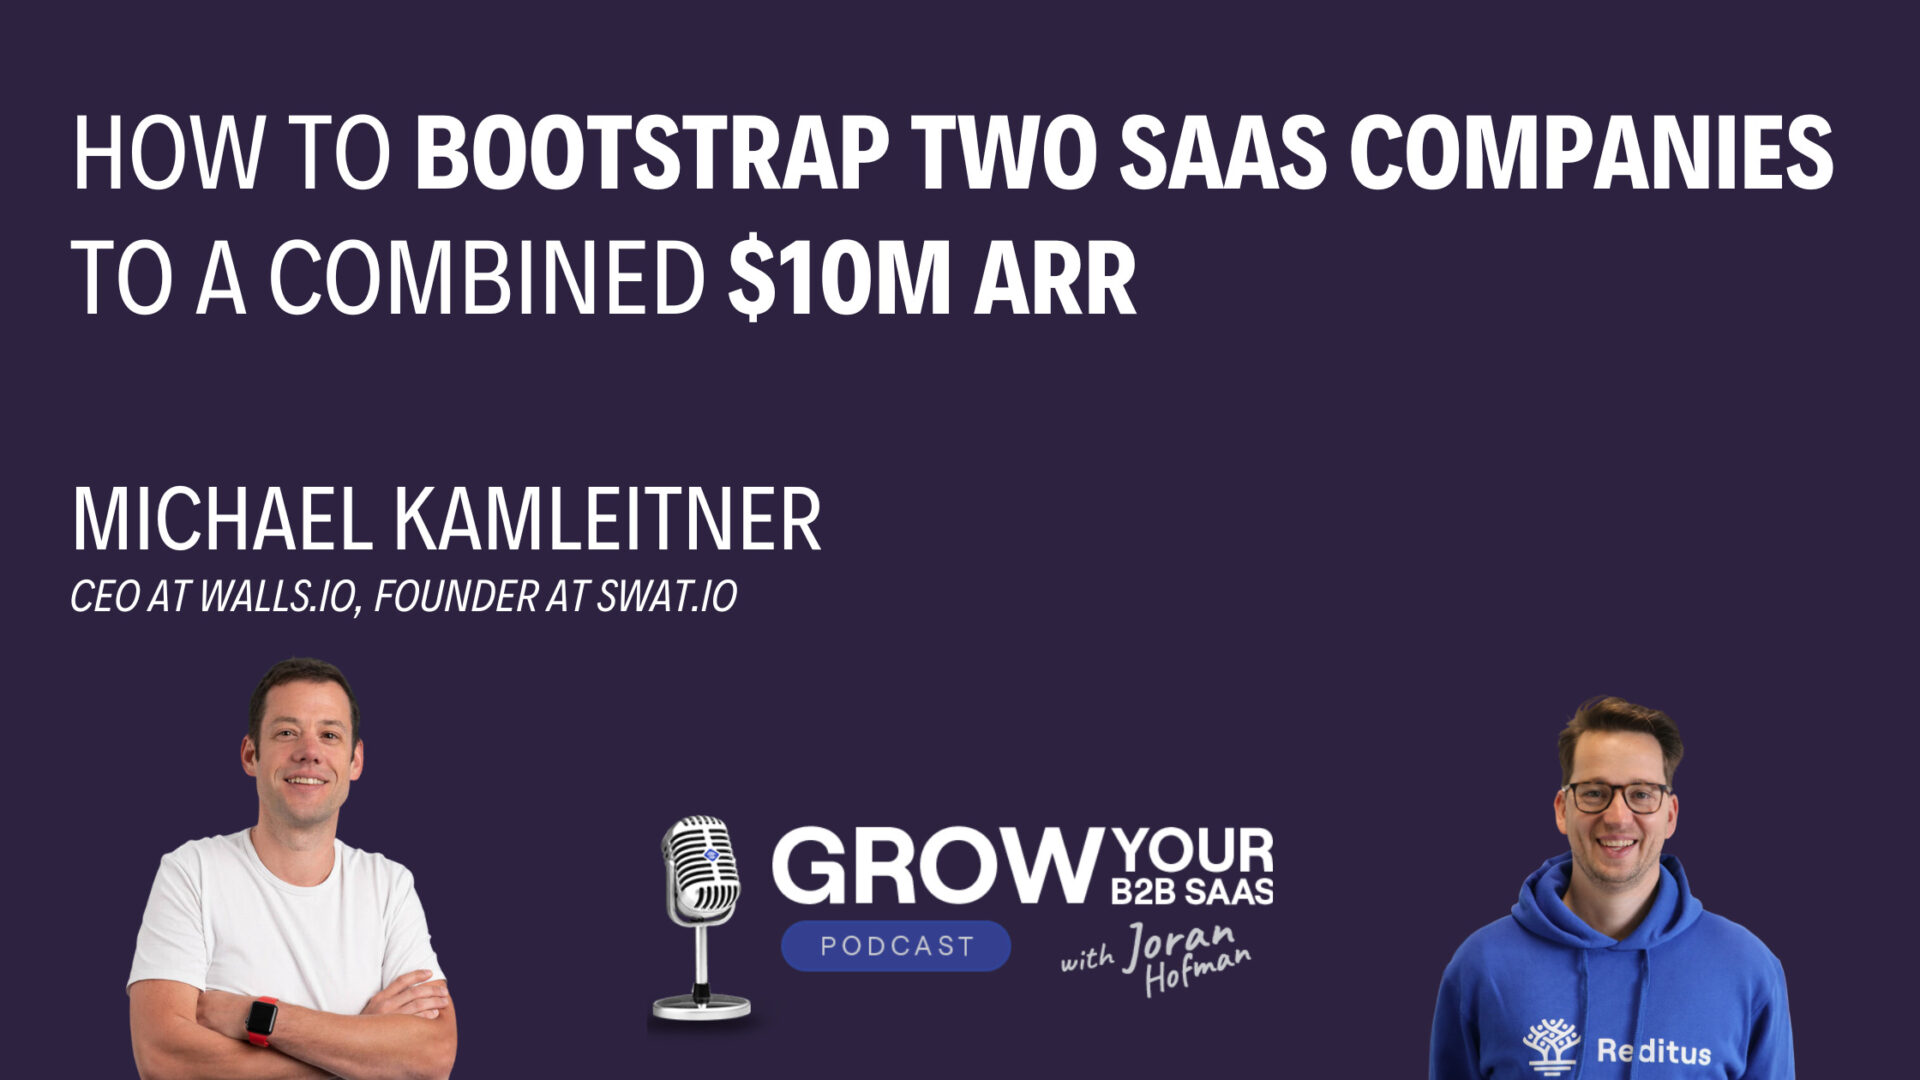 S4E1 – How to bootstrap two SaaS companies to a combined $10M ARR With Michael Kamleitner